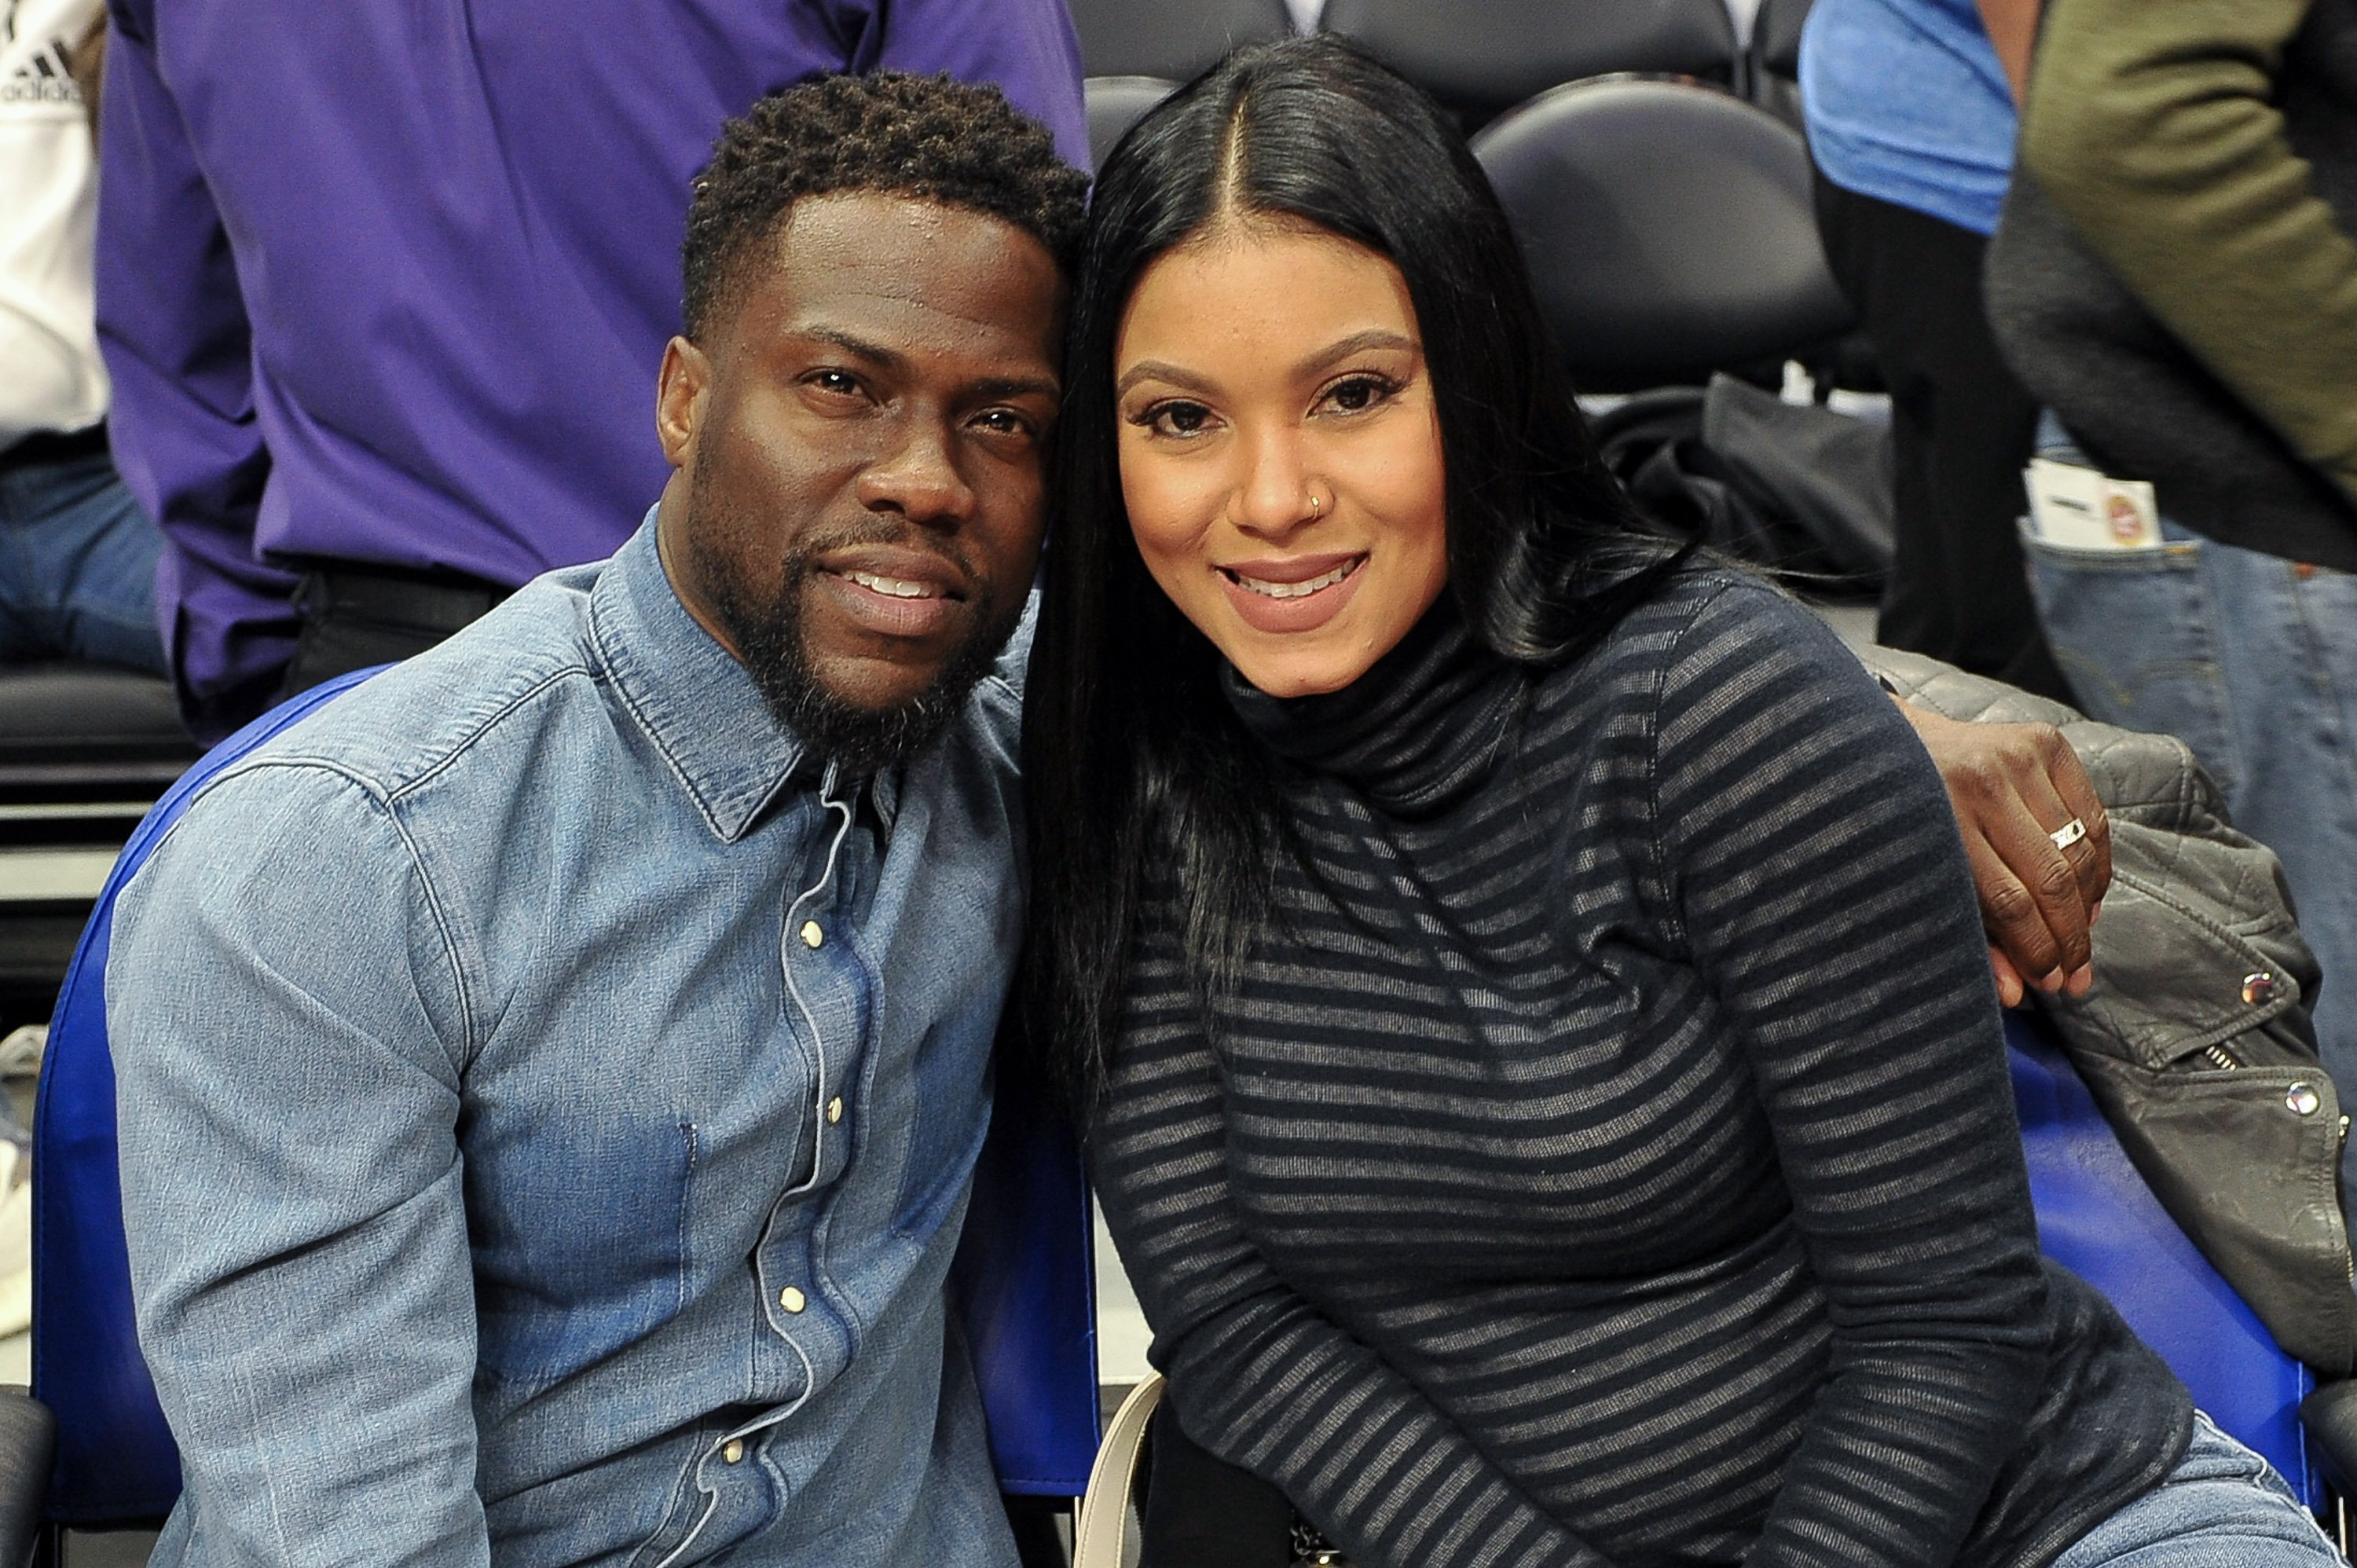 'Jumanji' Actor Kevin Hart's ExWife Torrei Hart Is Going on a Comedy